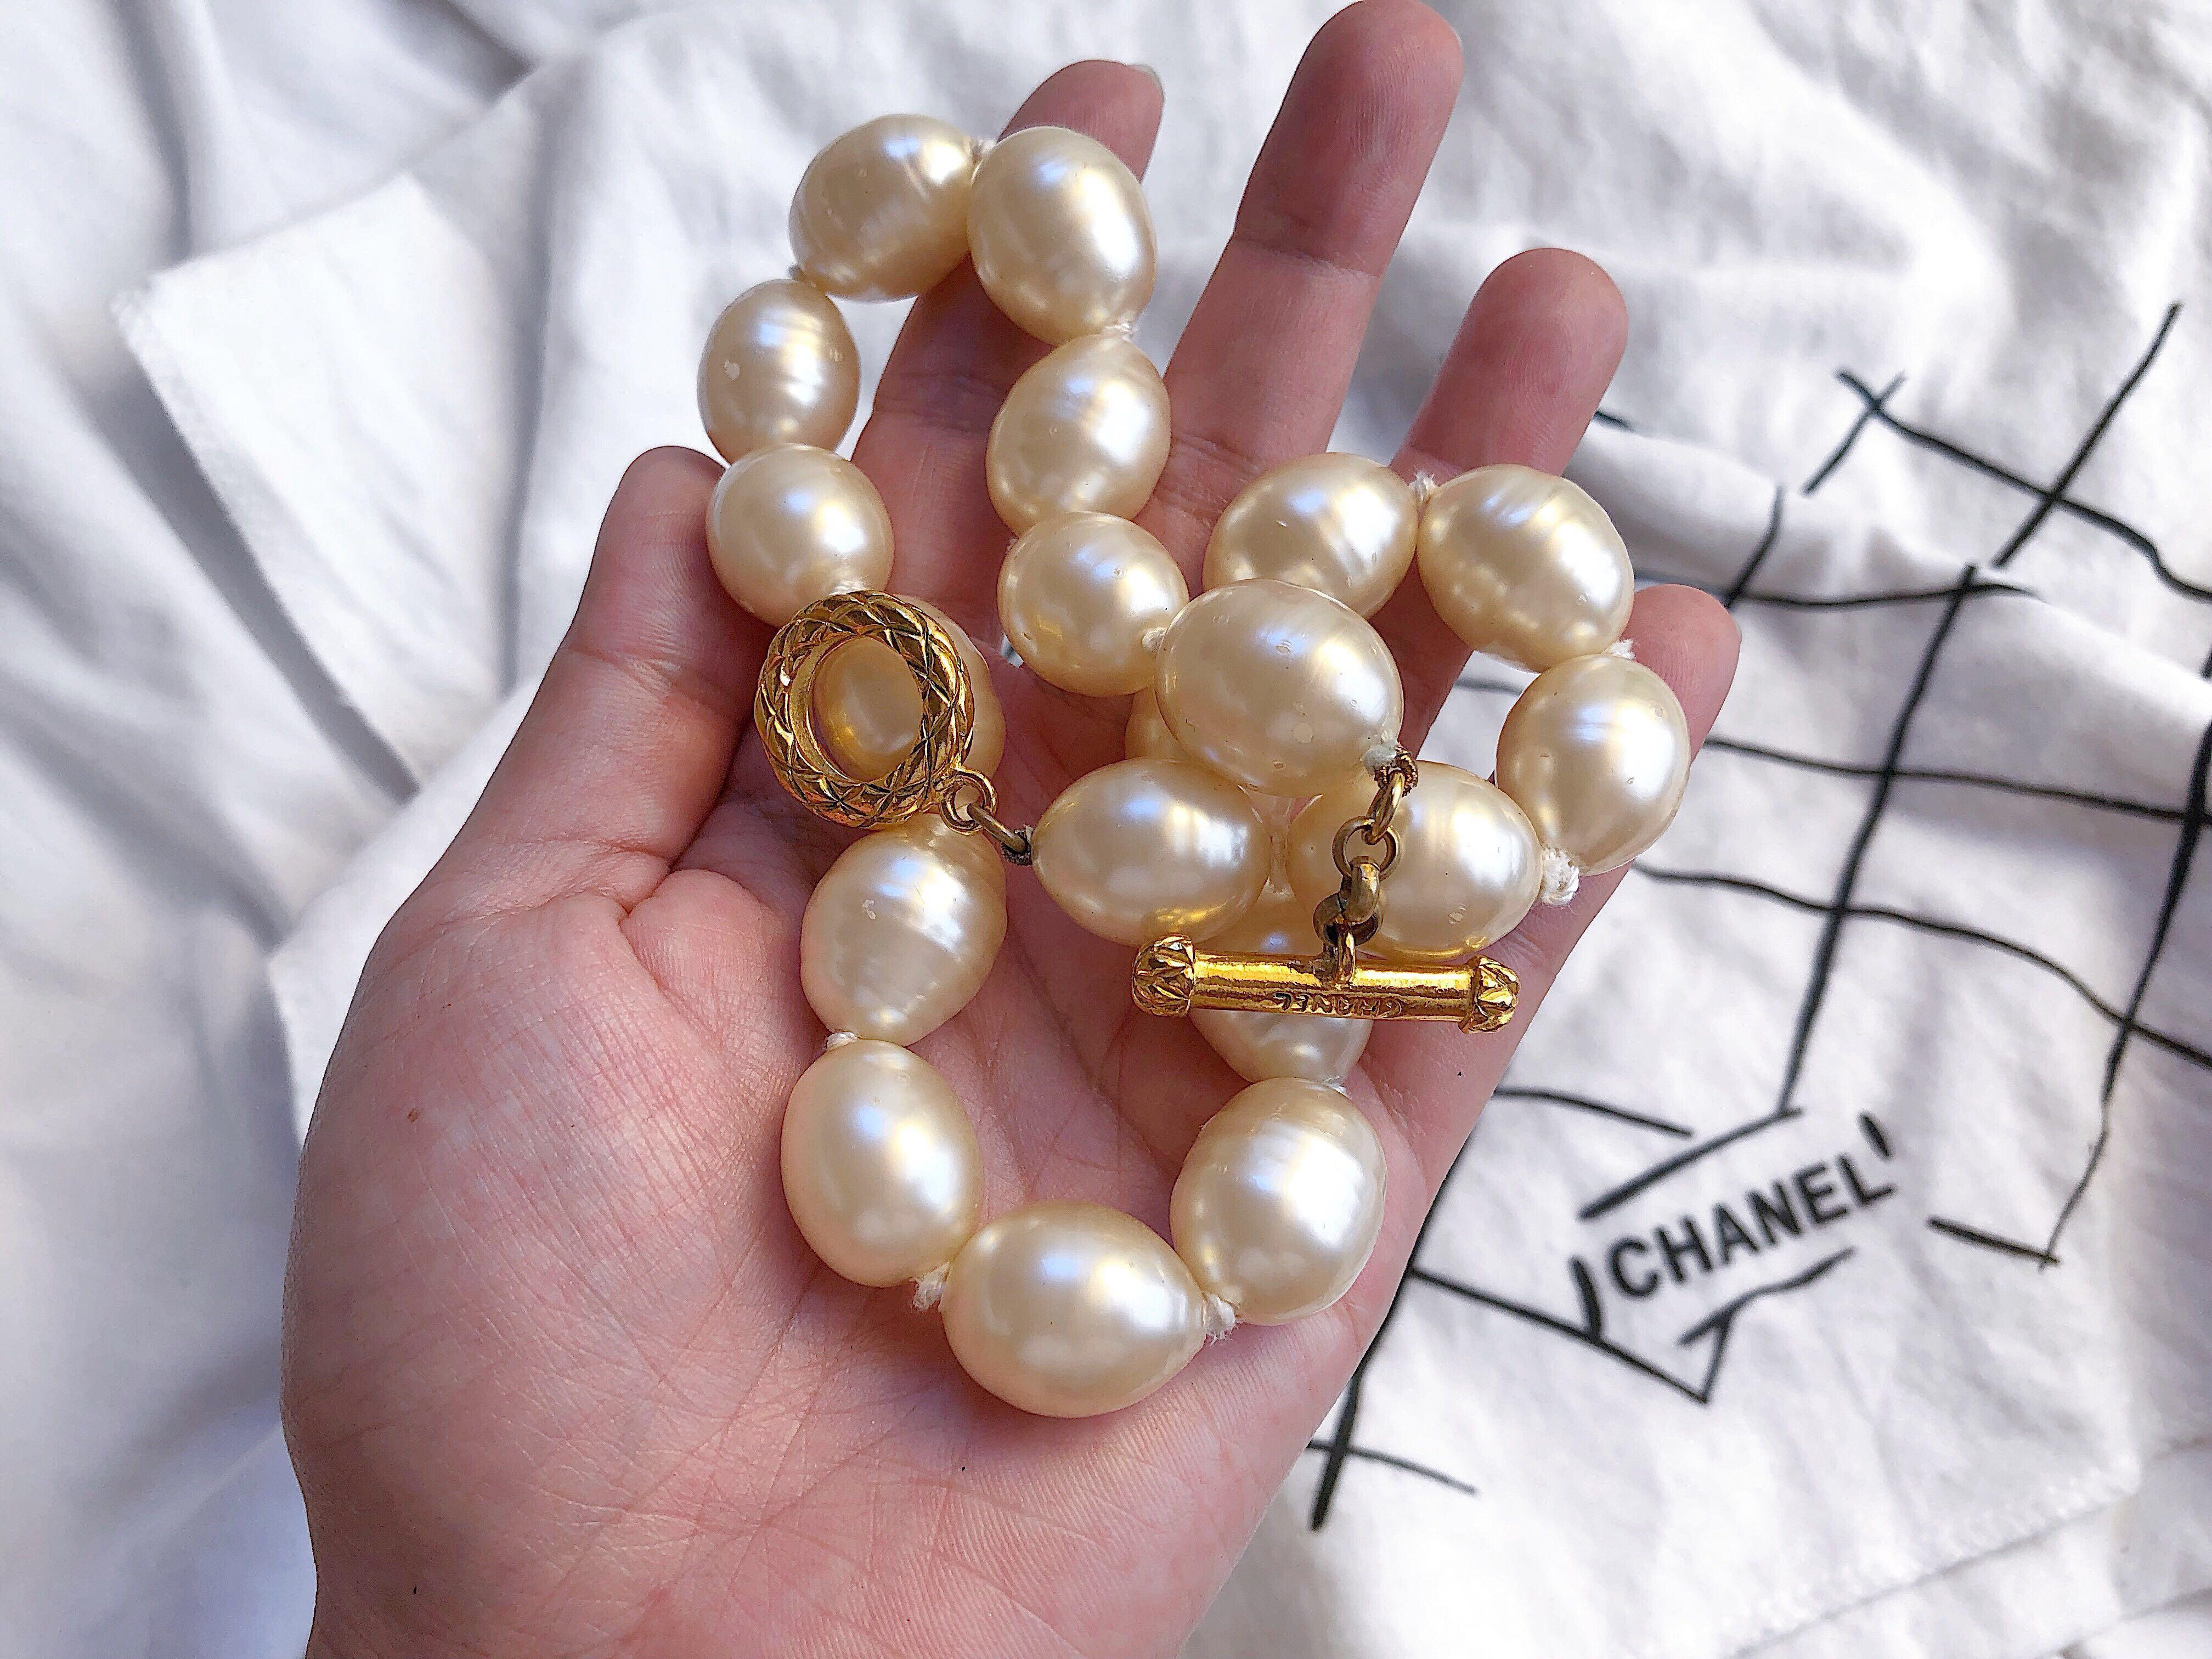 Vintage Chanel Peach Synthetic Pearl Necklace